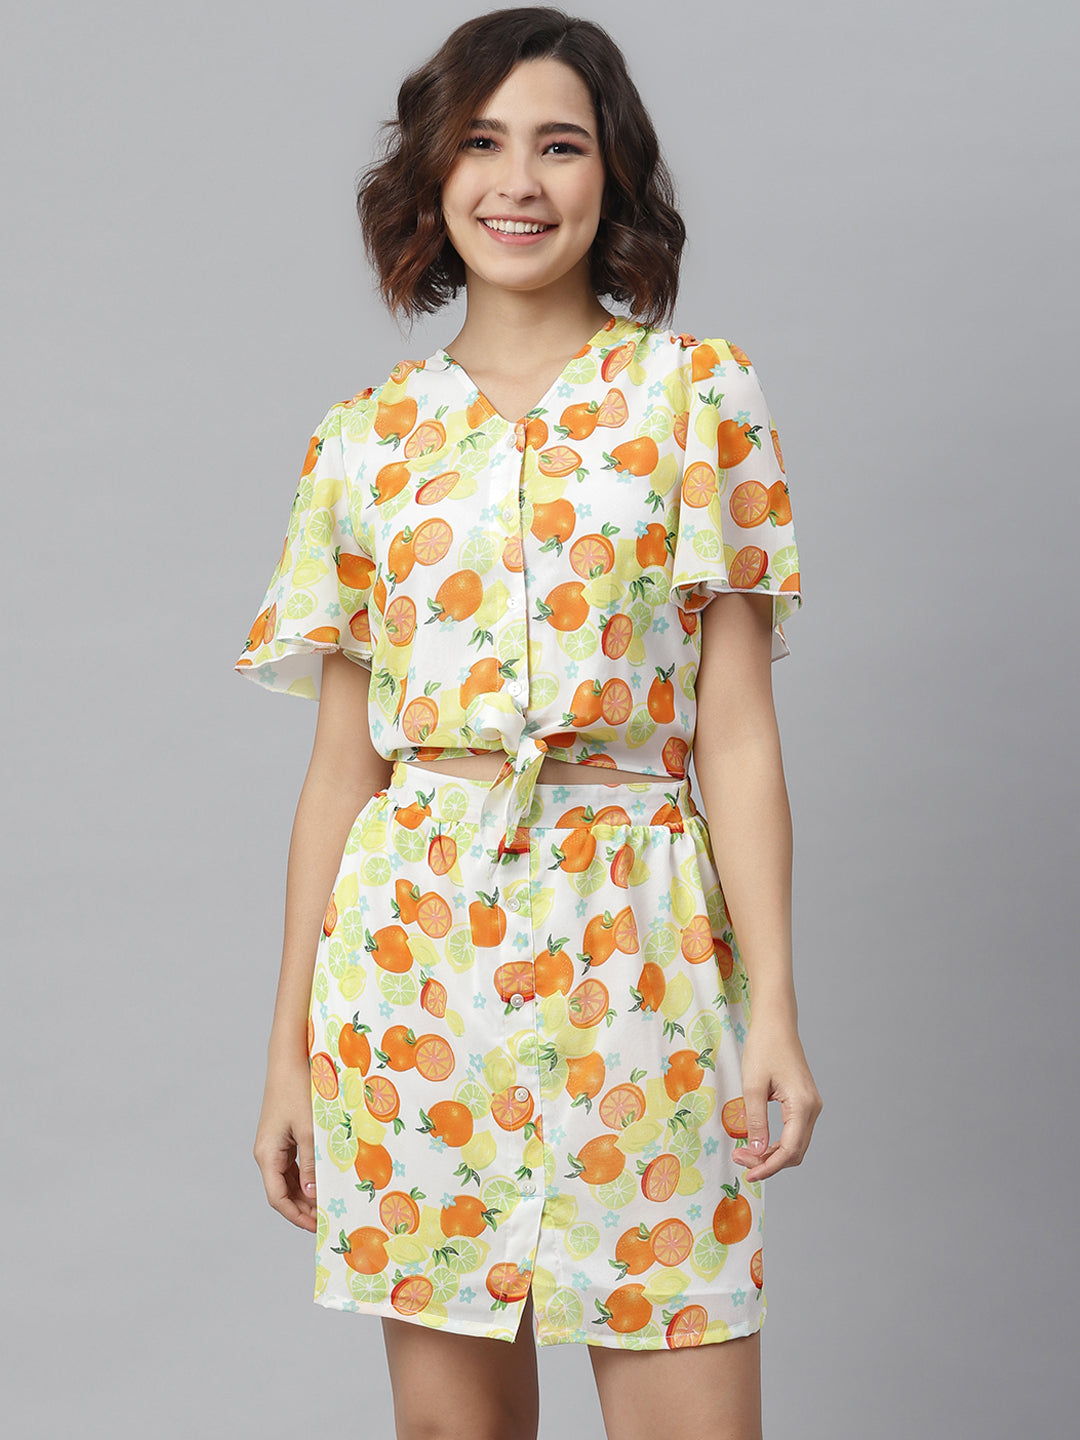 Lemon Orange PrintedTie Knot Top and attached Skirt Dress